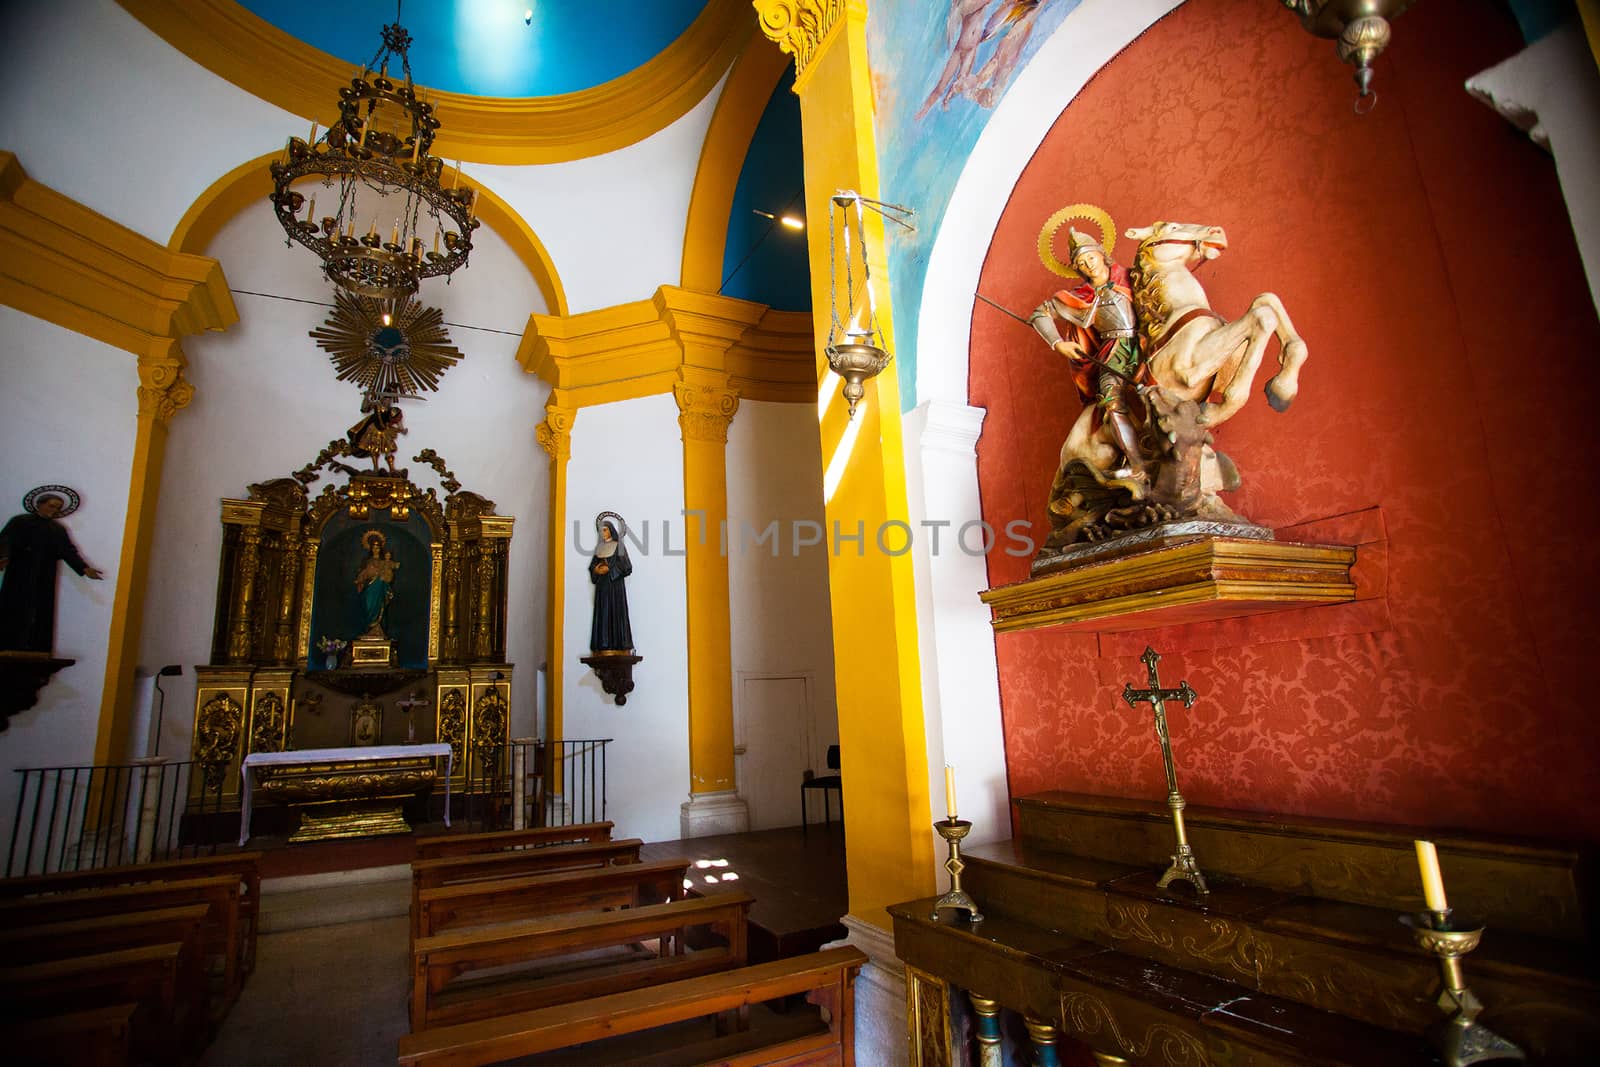 Tossa de Mar, Spain, JUNE 15, 2013: monument of ancient architecture - HOUSE OF CULTURE AND KING THOMAS VIDAL - ANTIQUE HOSPITAL OF SAN MIGUEL, interior of the chapel